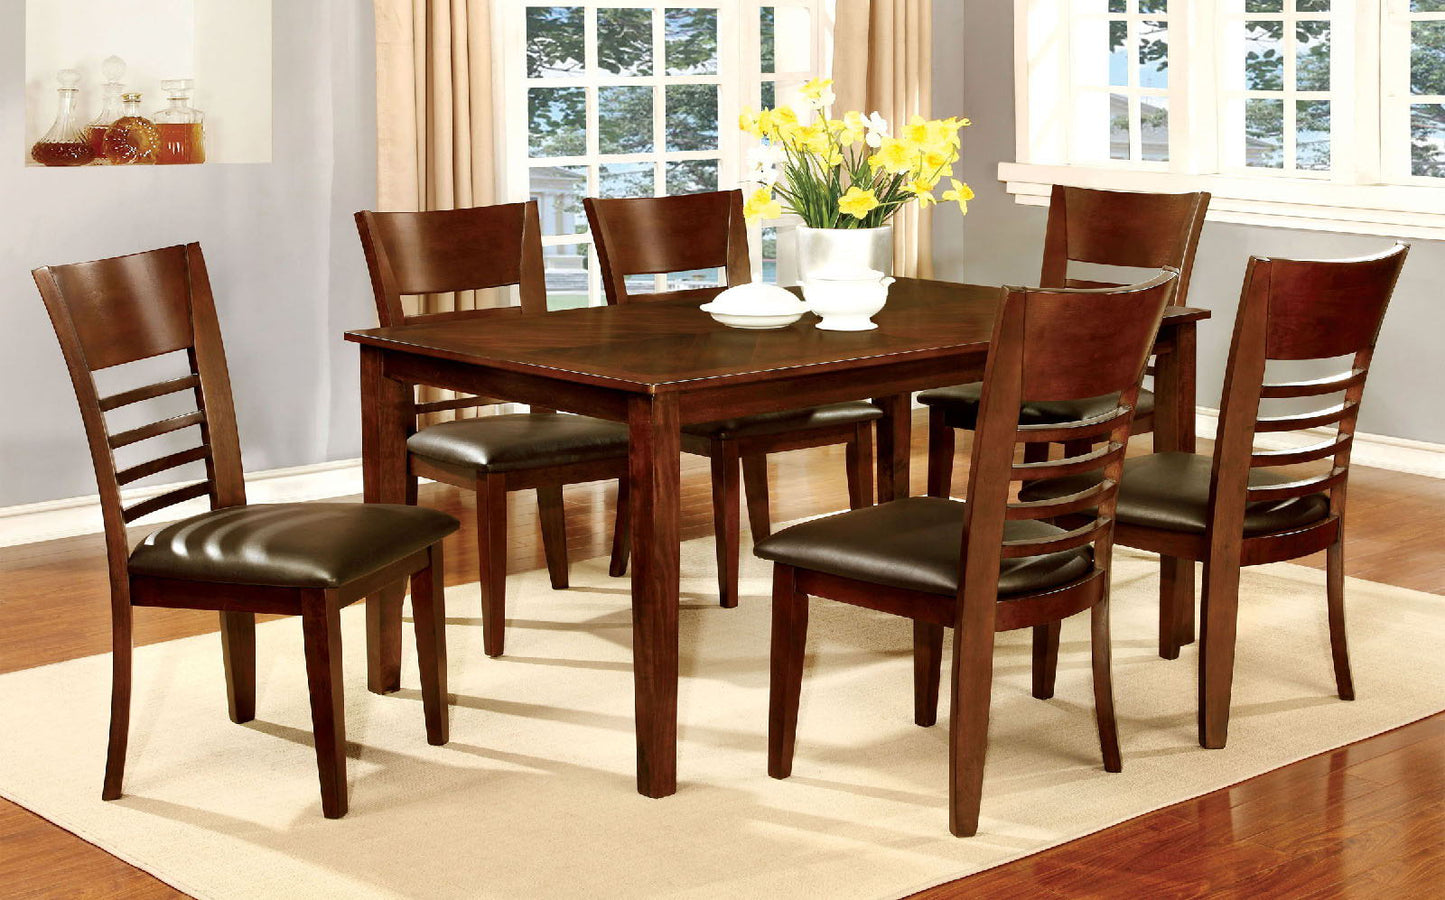 Hillsview - Dining Table - Brown Cherry / Espresso